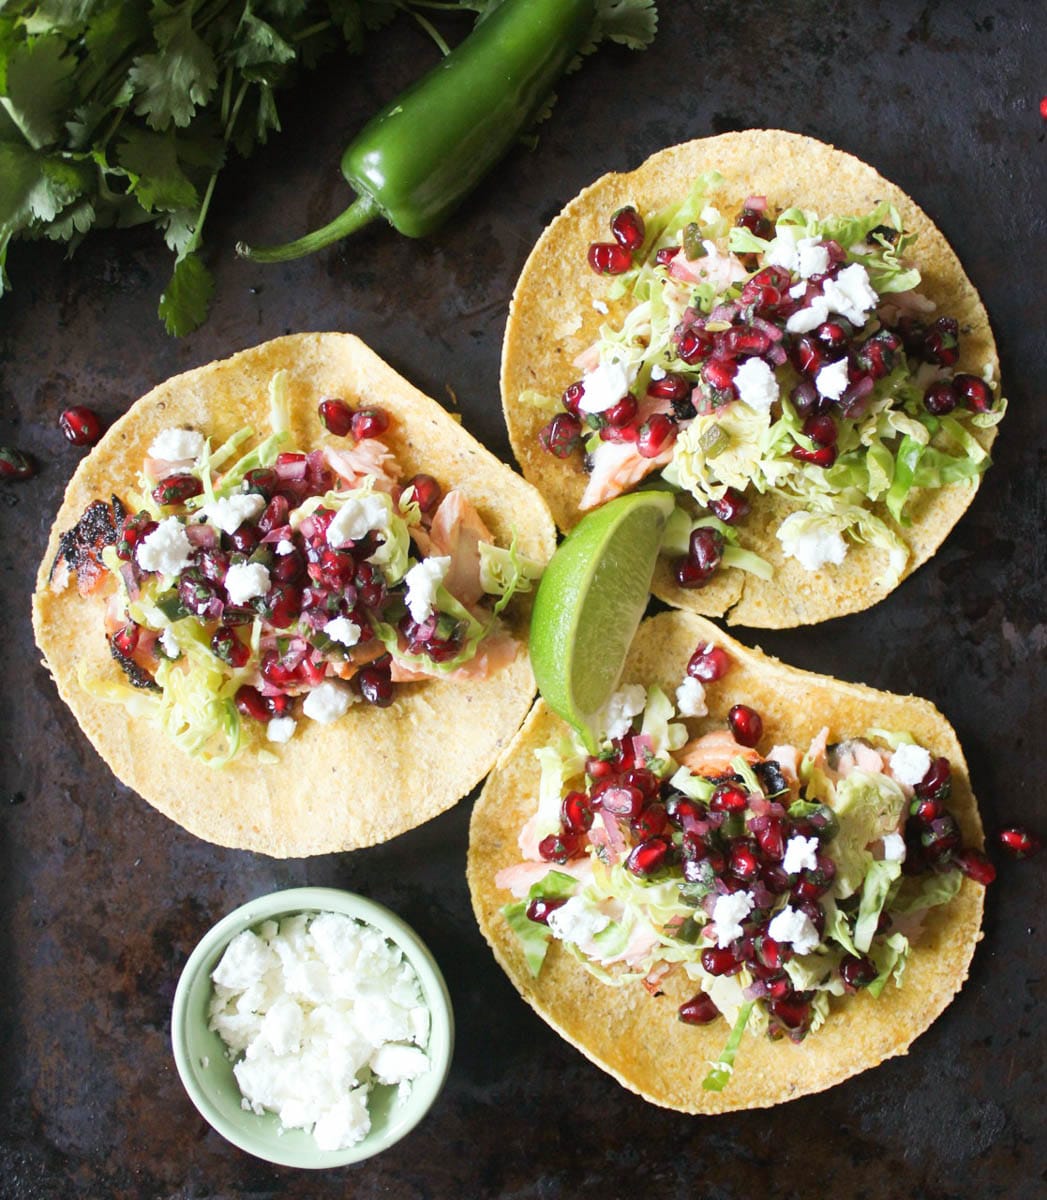 Grilled-Salmon-Tacos-with-Pomegranate-Jalapeno-Salsa-with-Brussels-Sprouts-and-Goat-Cheese-4.jpg